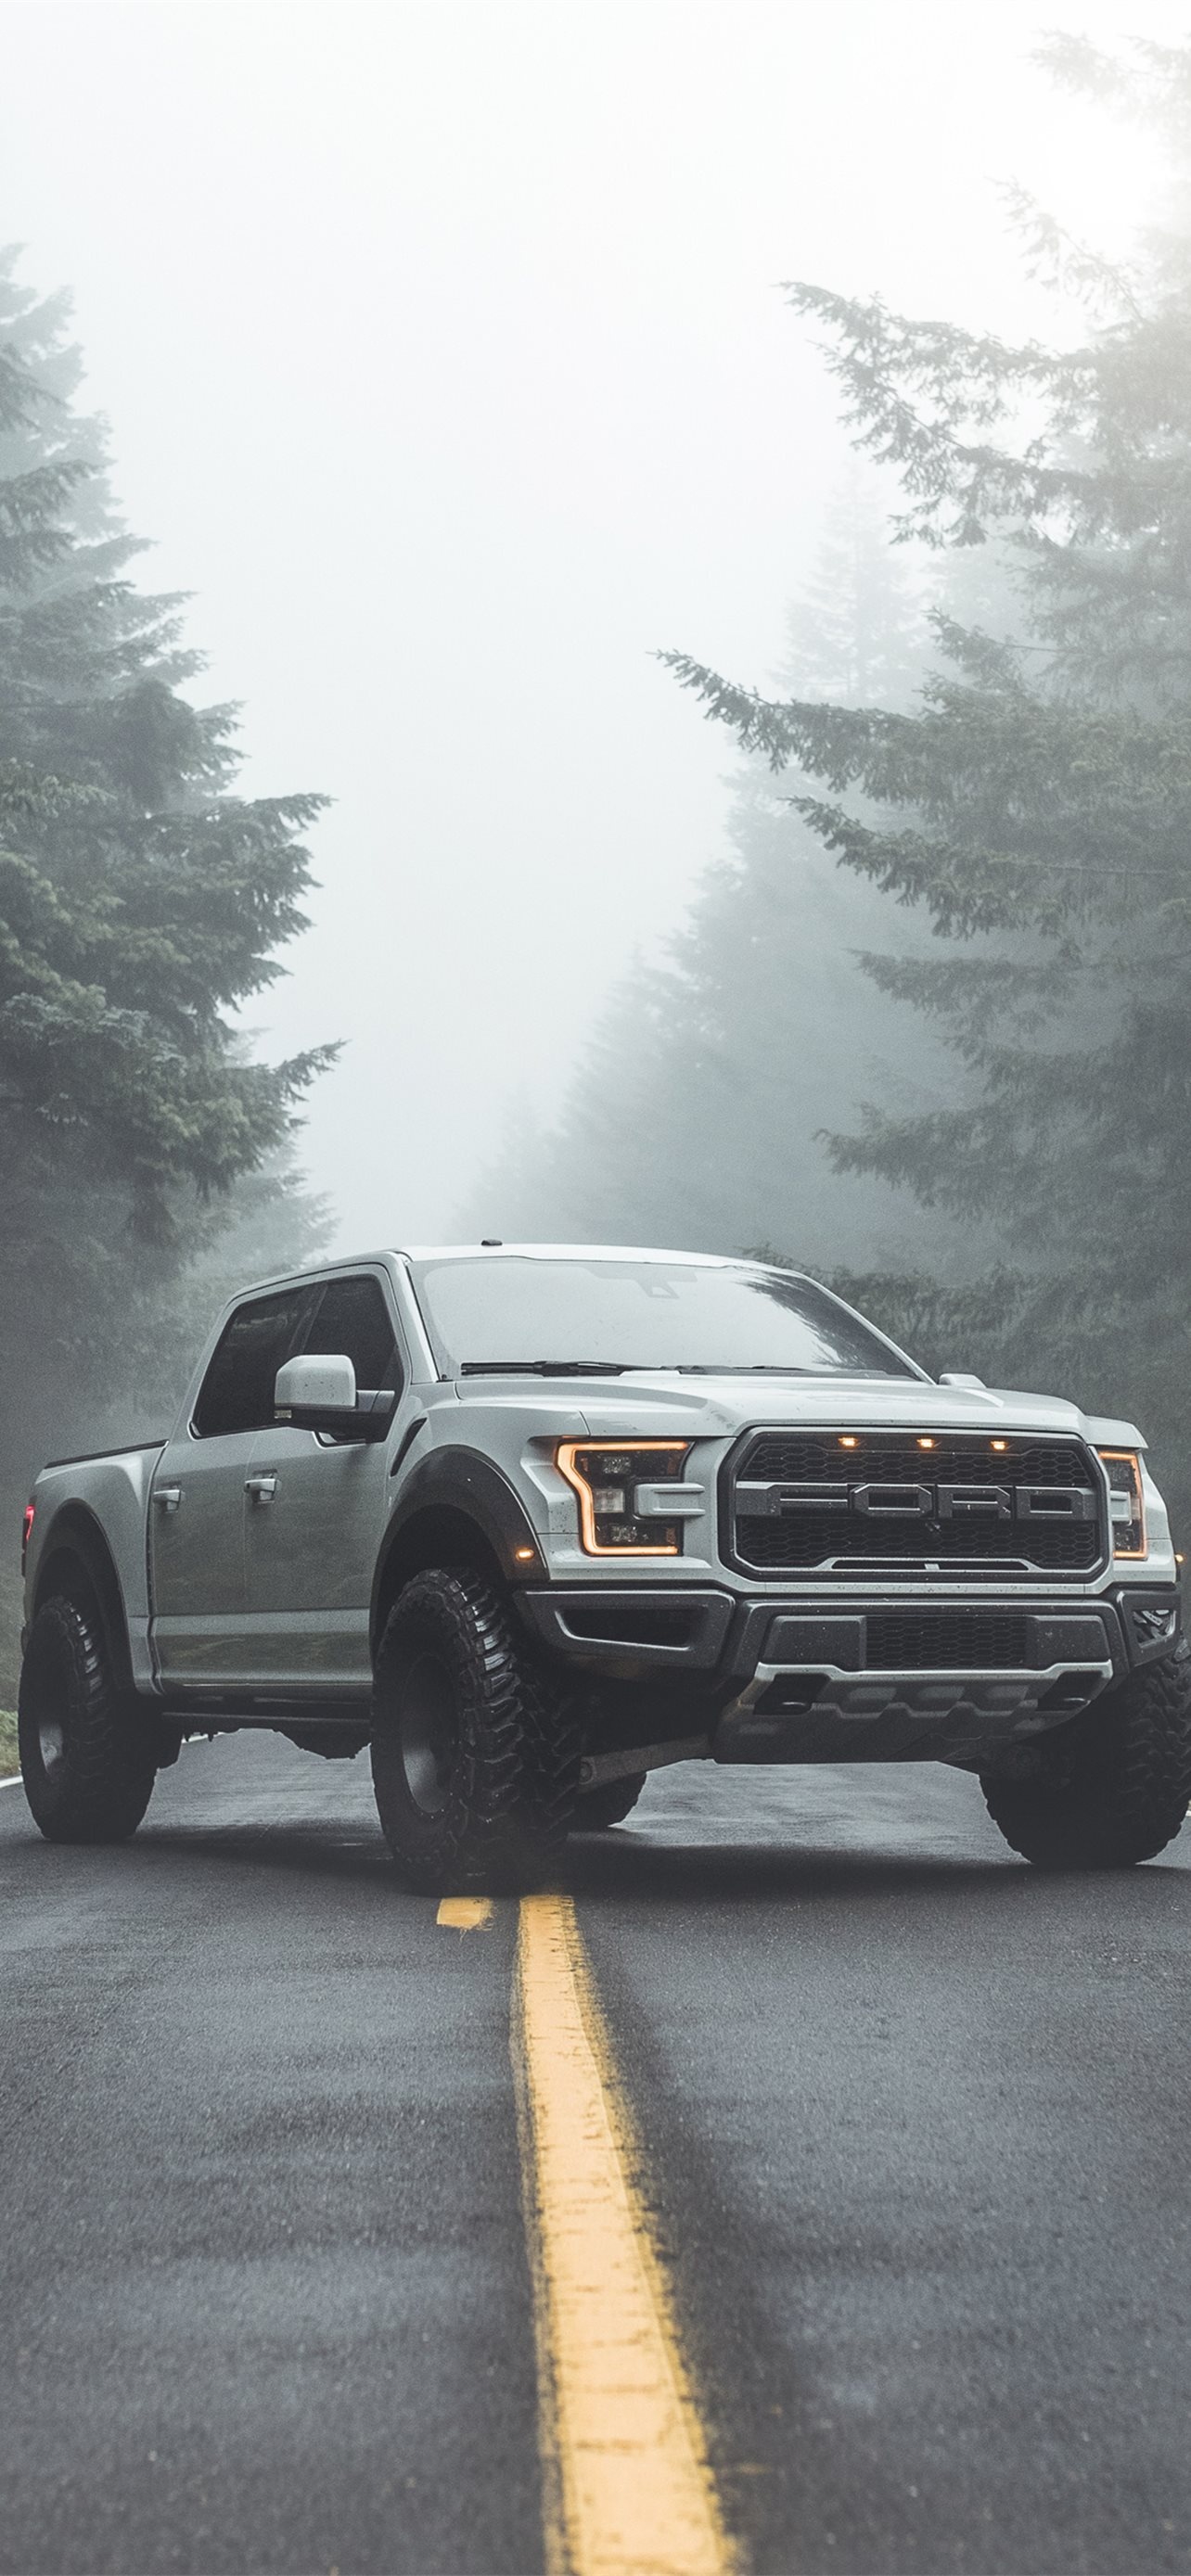 Ford F-150, Raptor iPhone wallpapers, HD images, Off-road power, 1290x2780 HD Handy